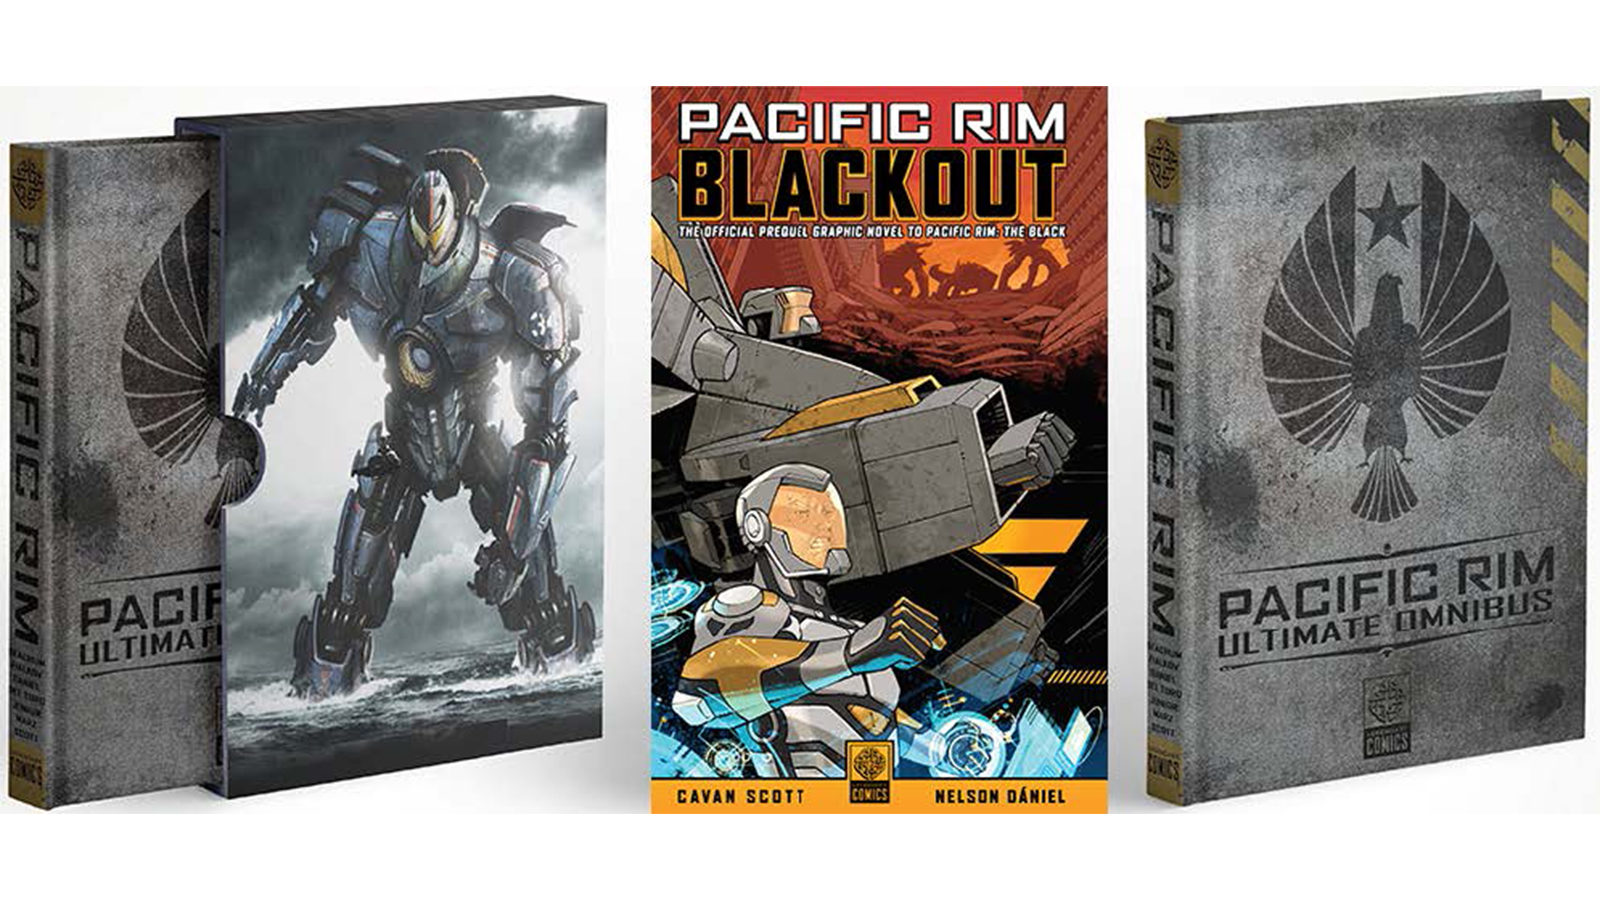 Legendary Comics Announces New Anime Companion Graphic Novel  Pacific Rim: Blackout, Revealing the Cover, and a New Pacific Rim:  Ultimate Omnibus Collection